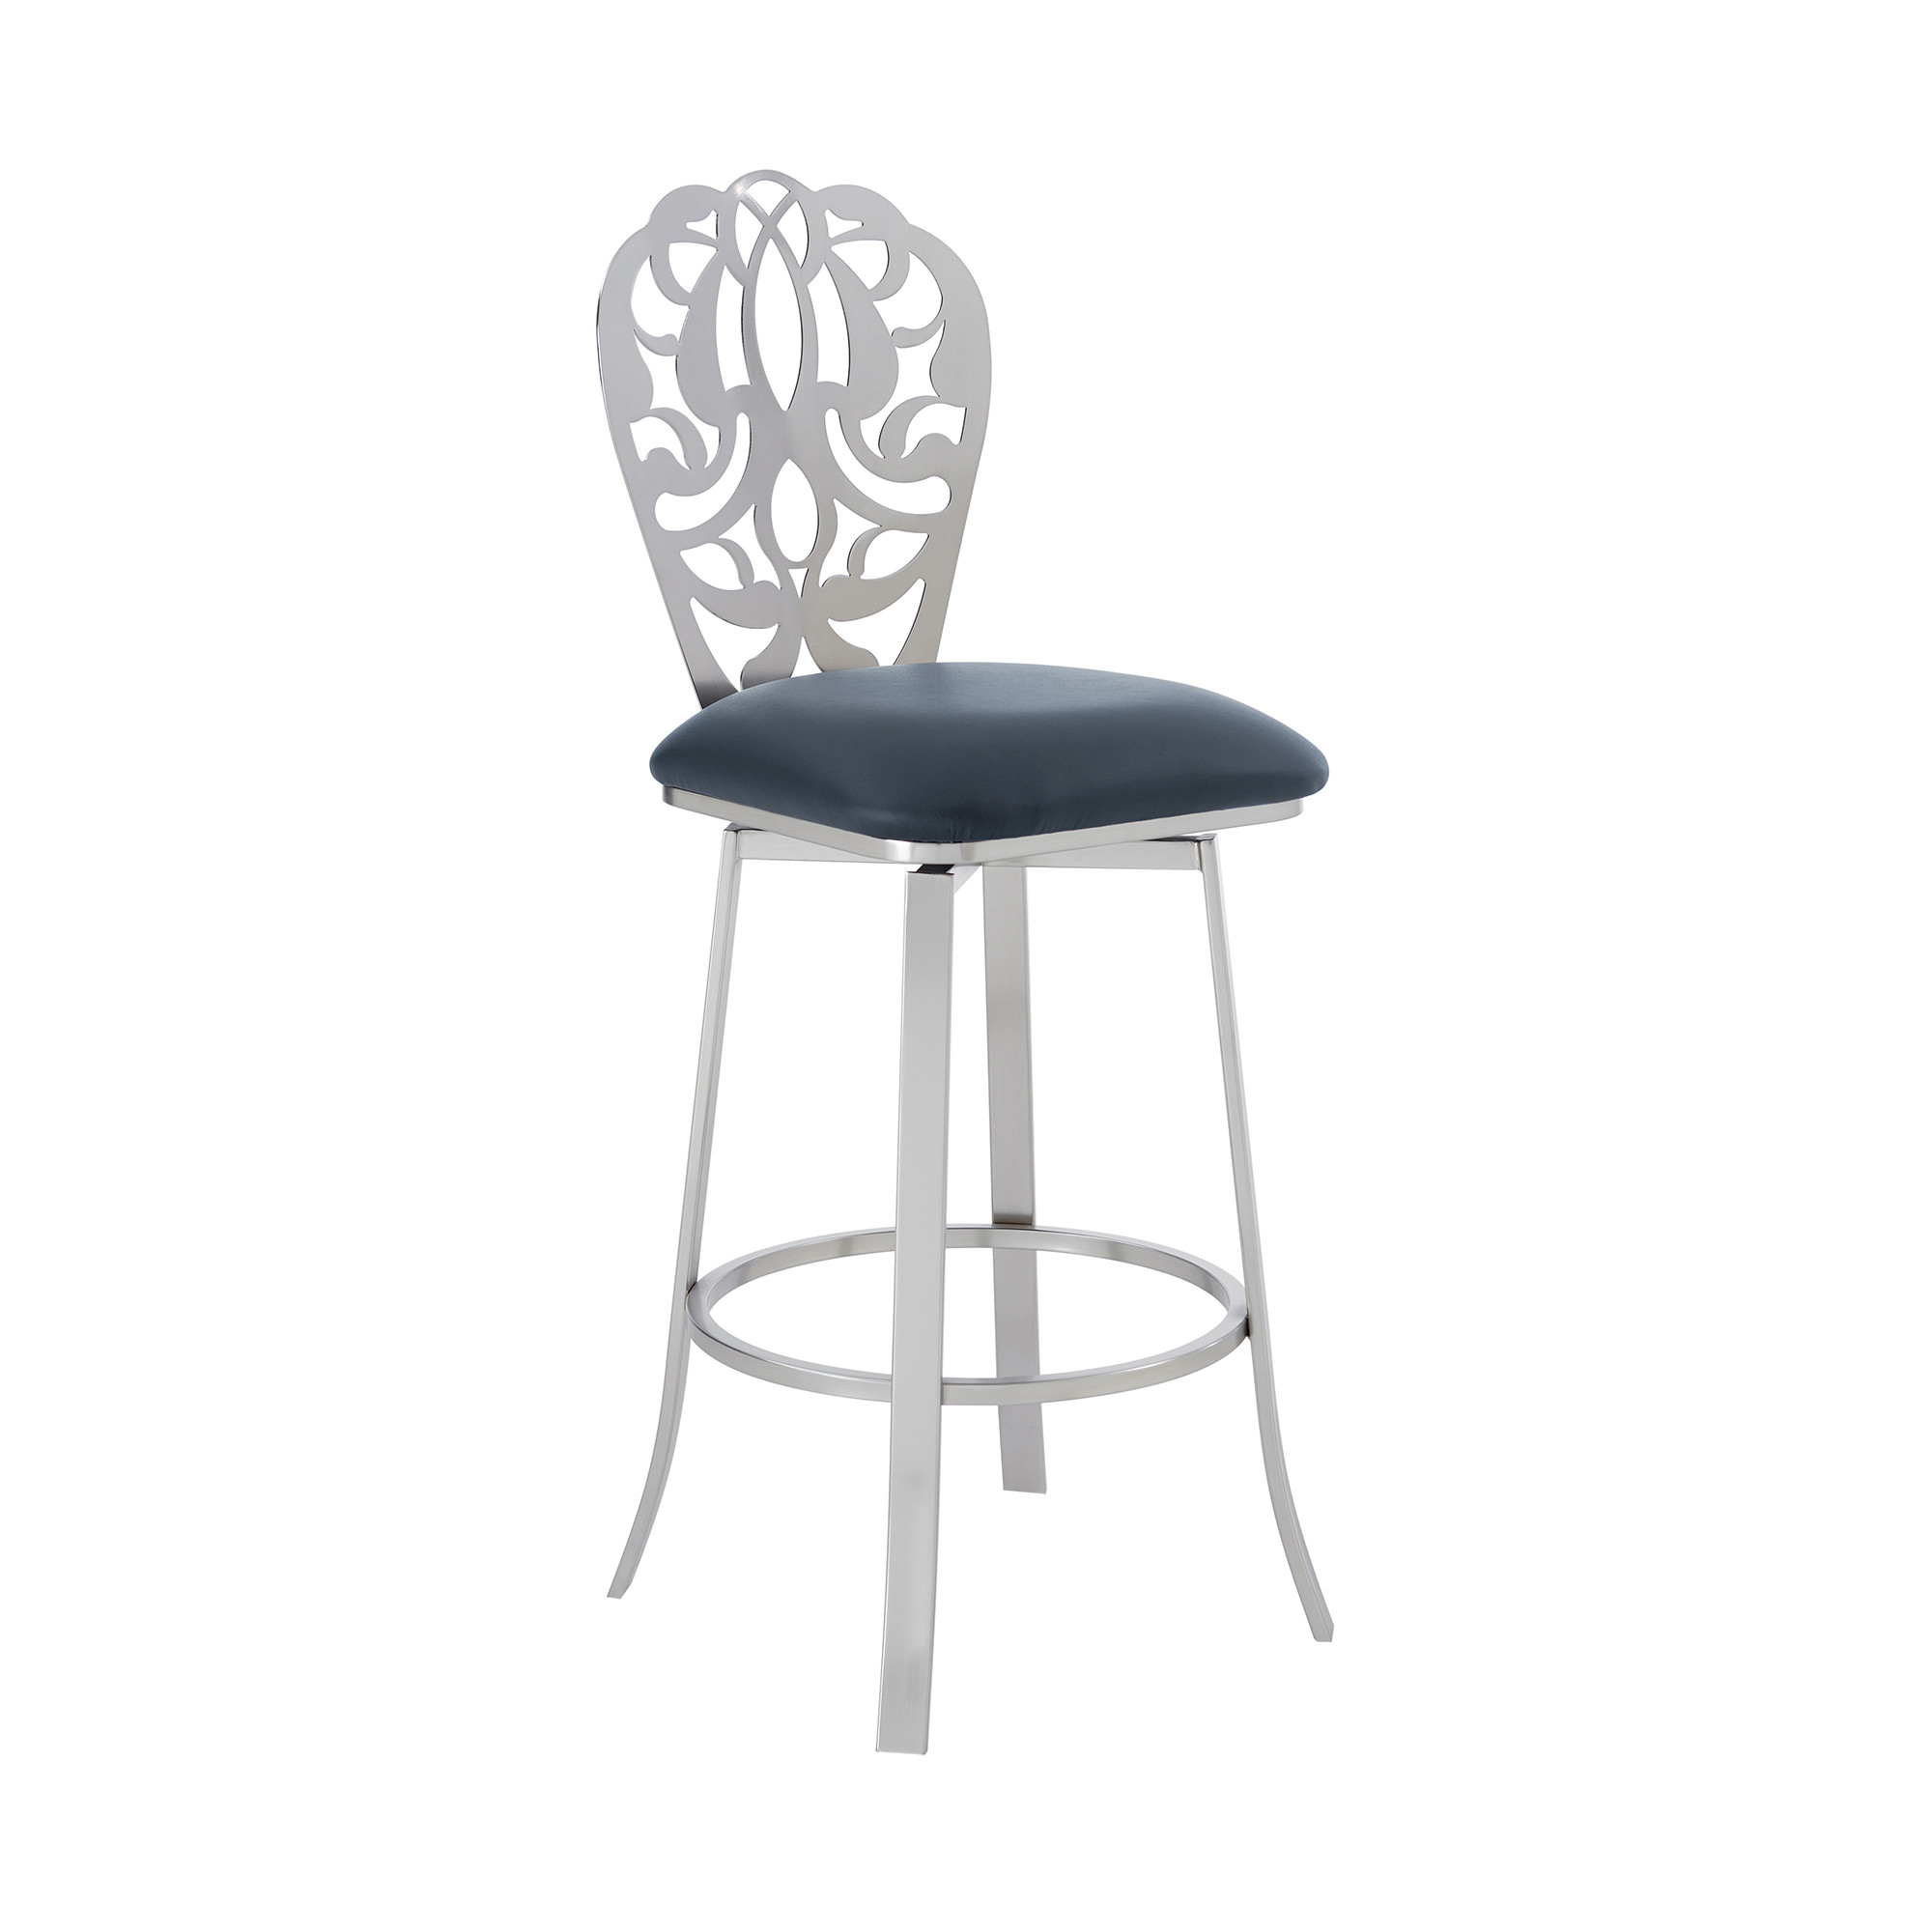 26" Grey Faux Leather Scroll Brushed Stainless Steel Swivel Bar Stool